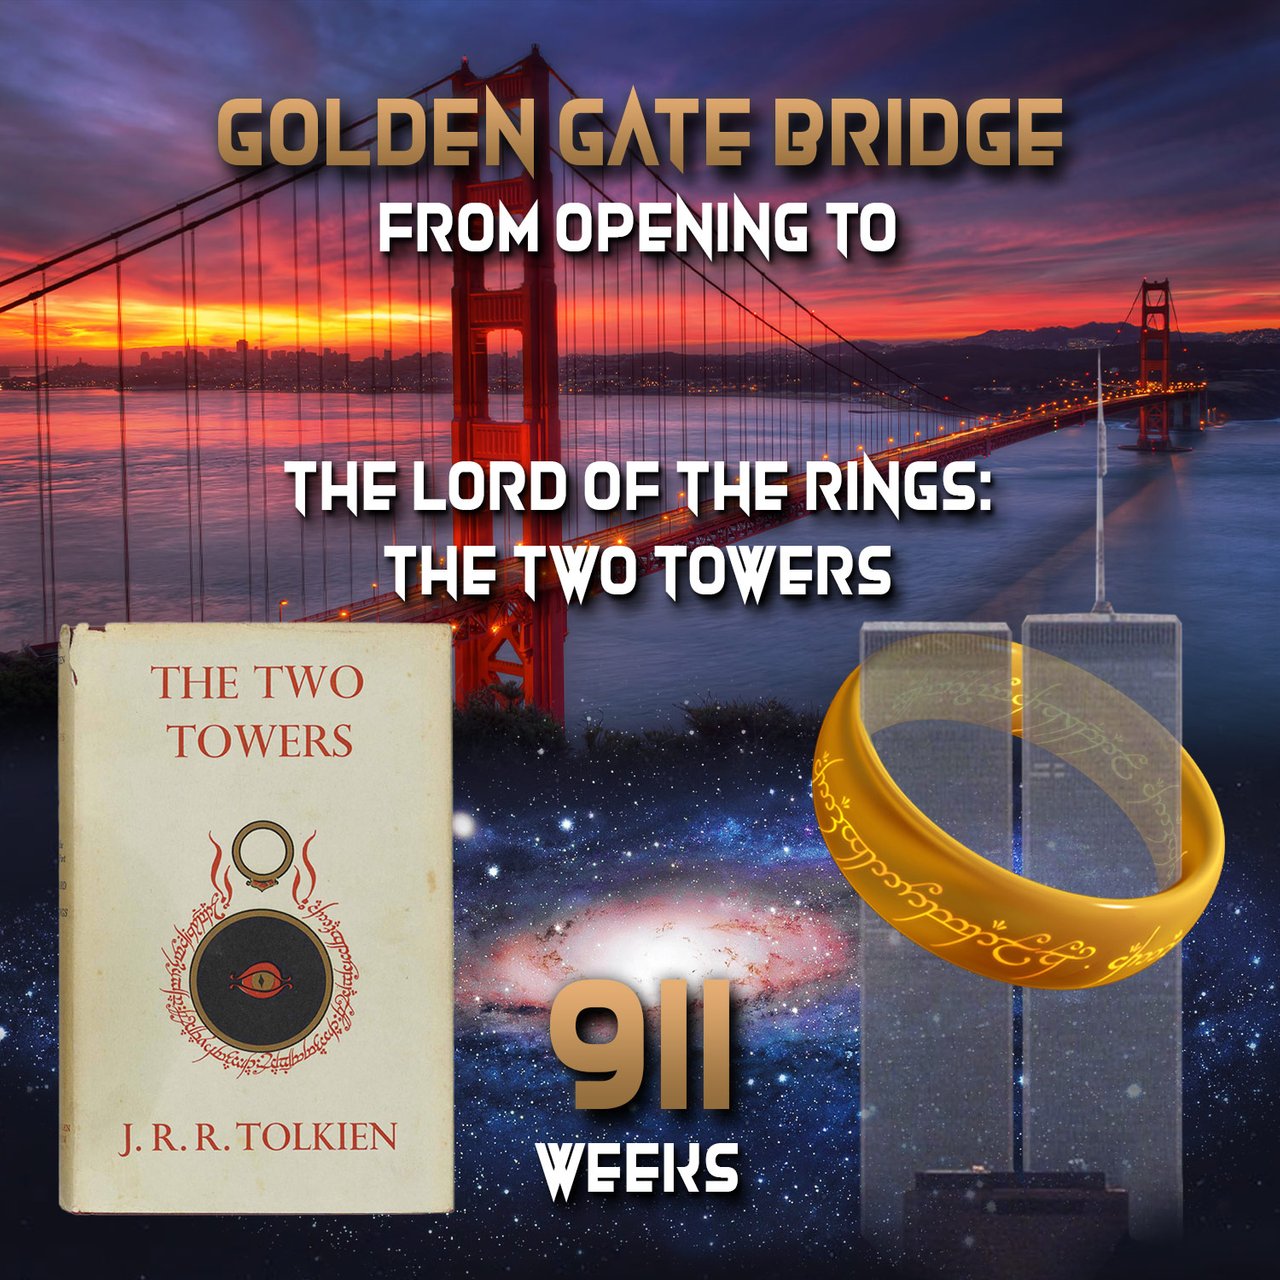 The Lord of the Rings: The Two Towers and the Golden Gate Bridge opening |  PeakD